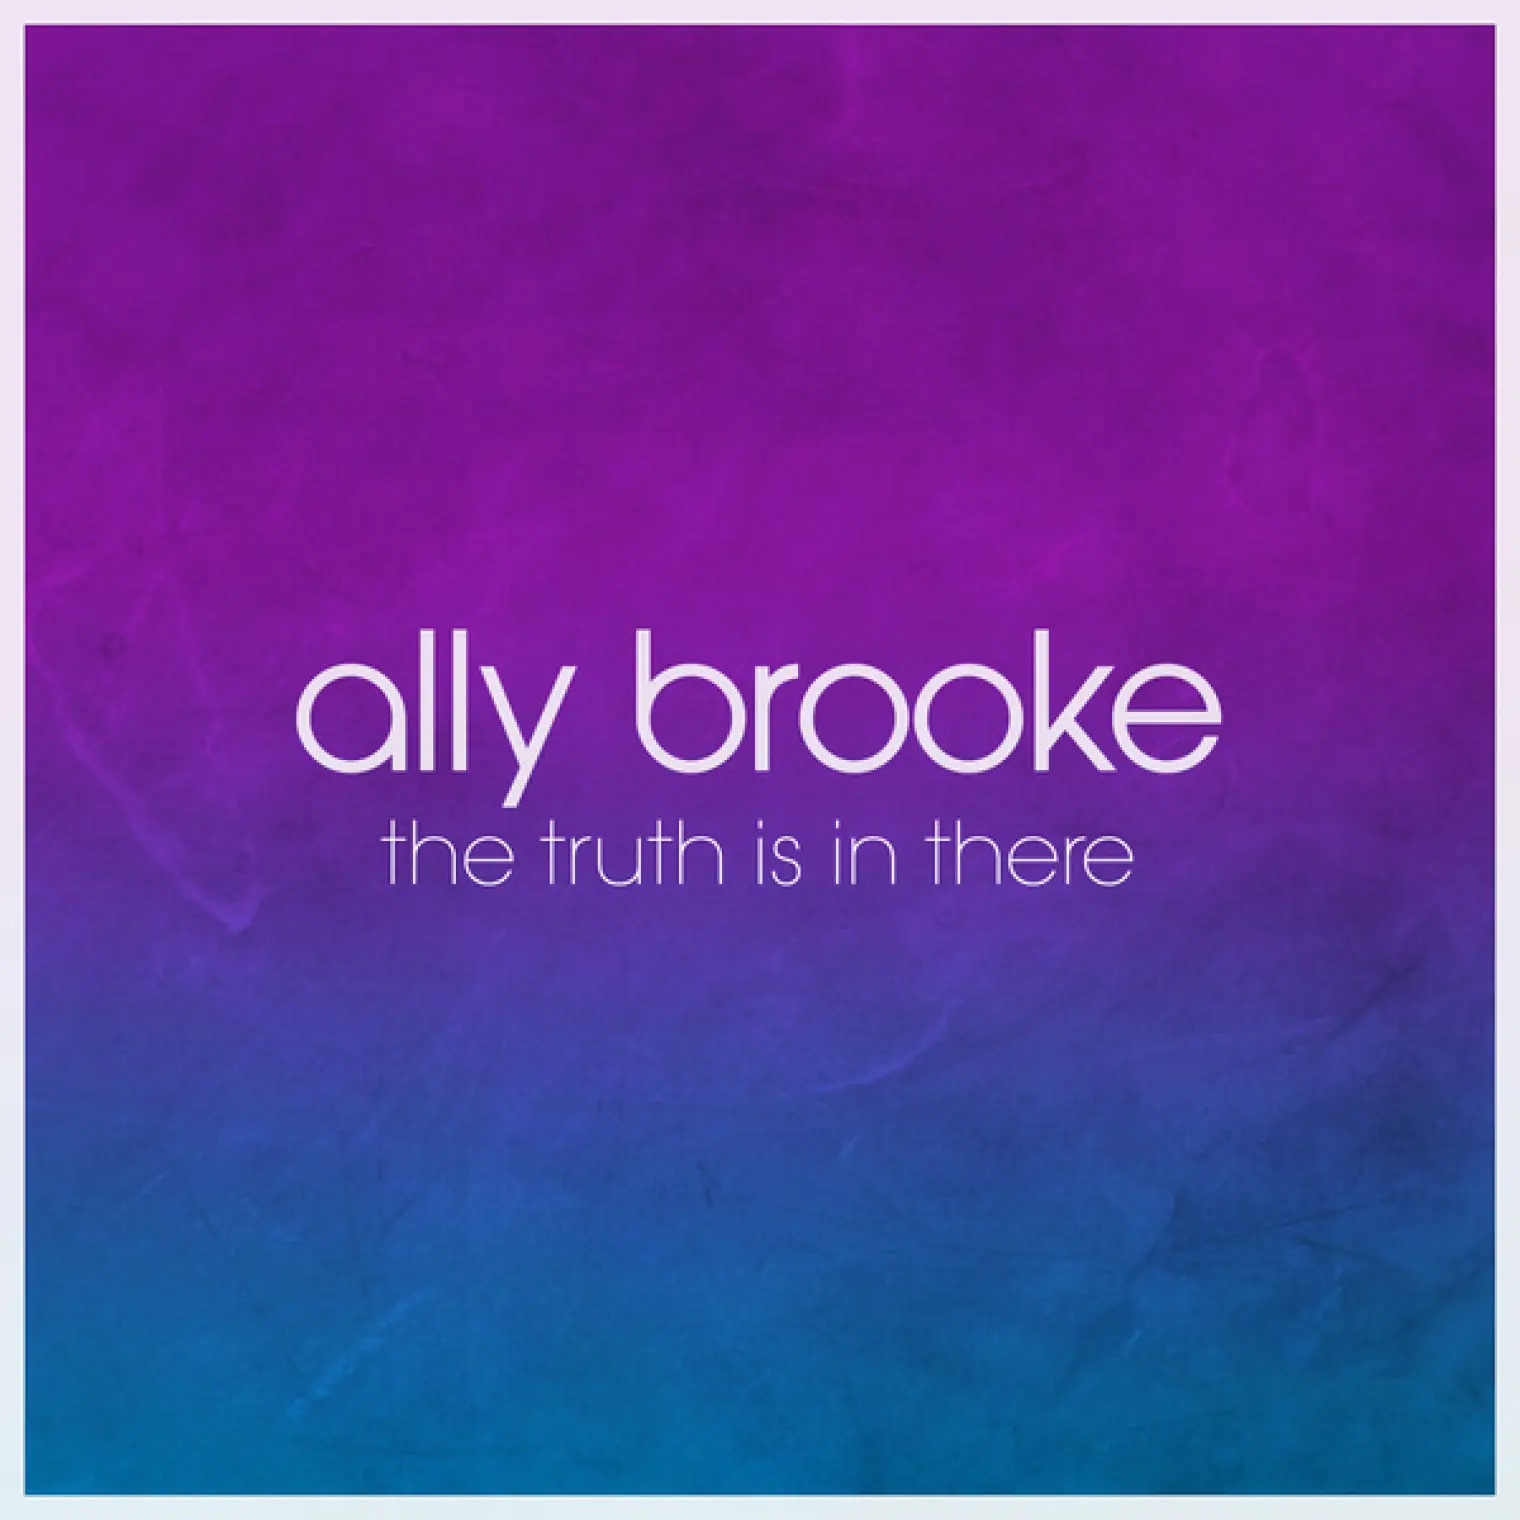 The Truth Is In There -  Ally Brooke 